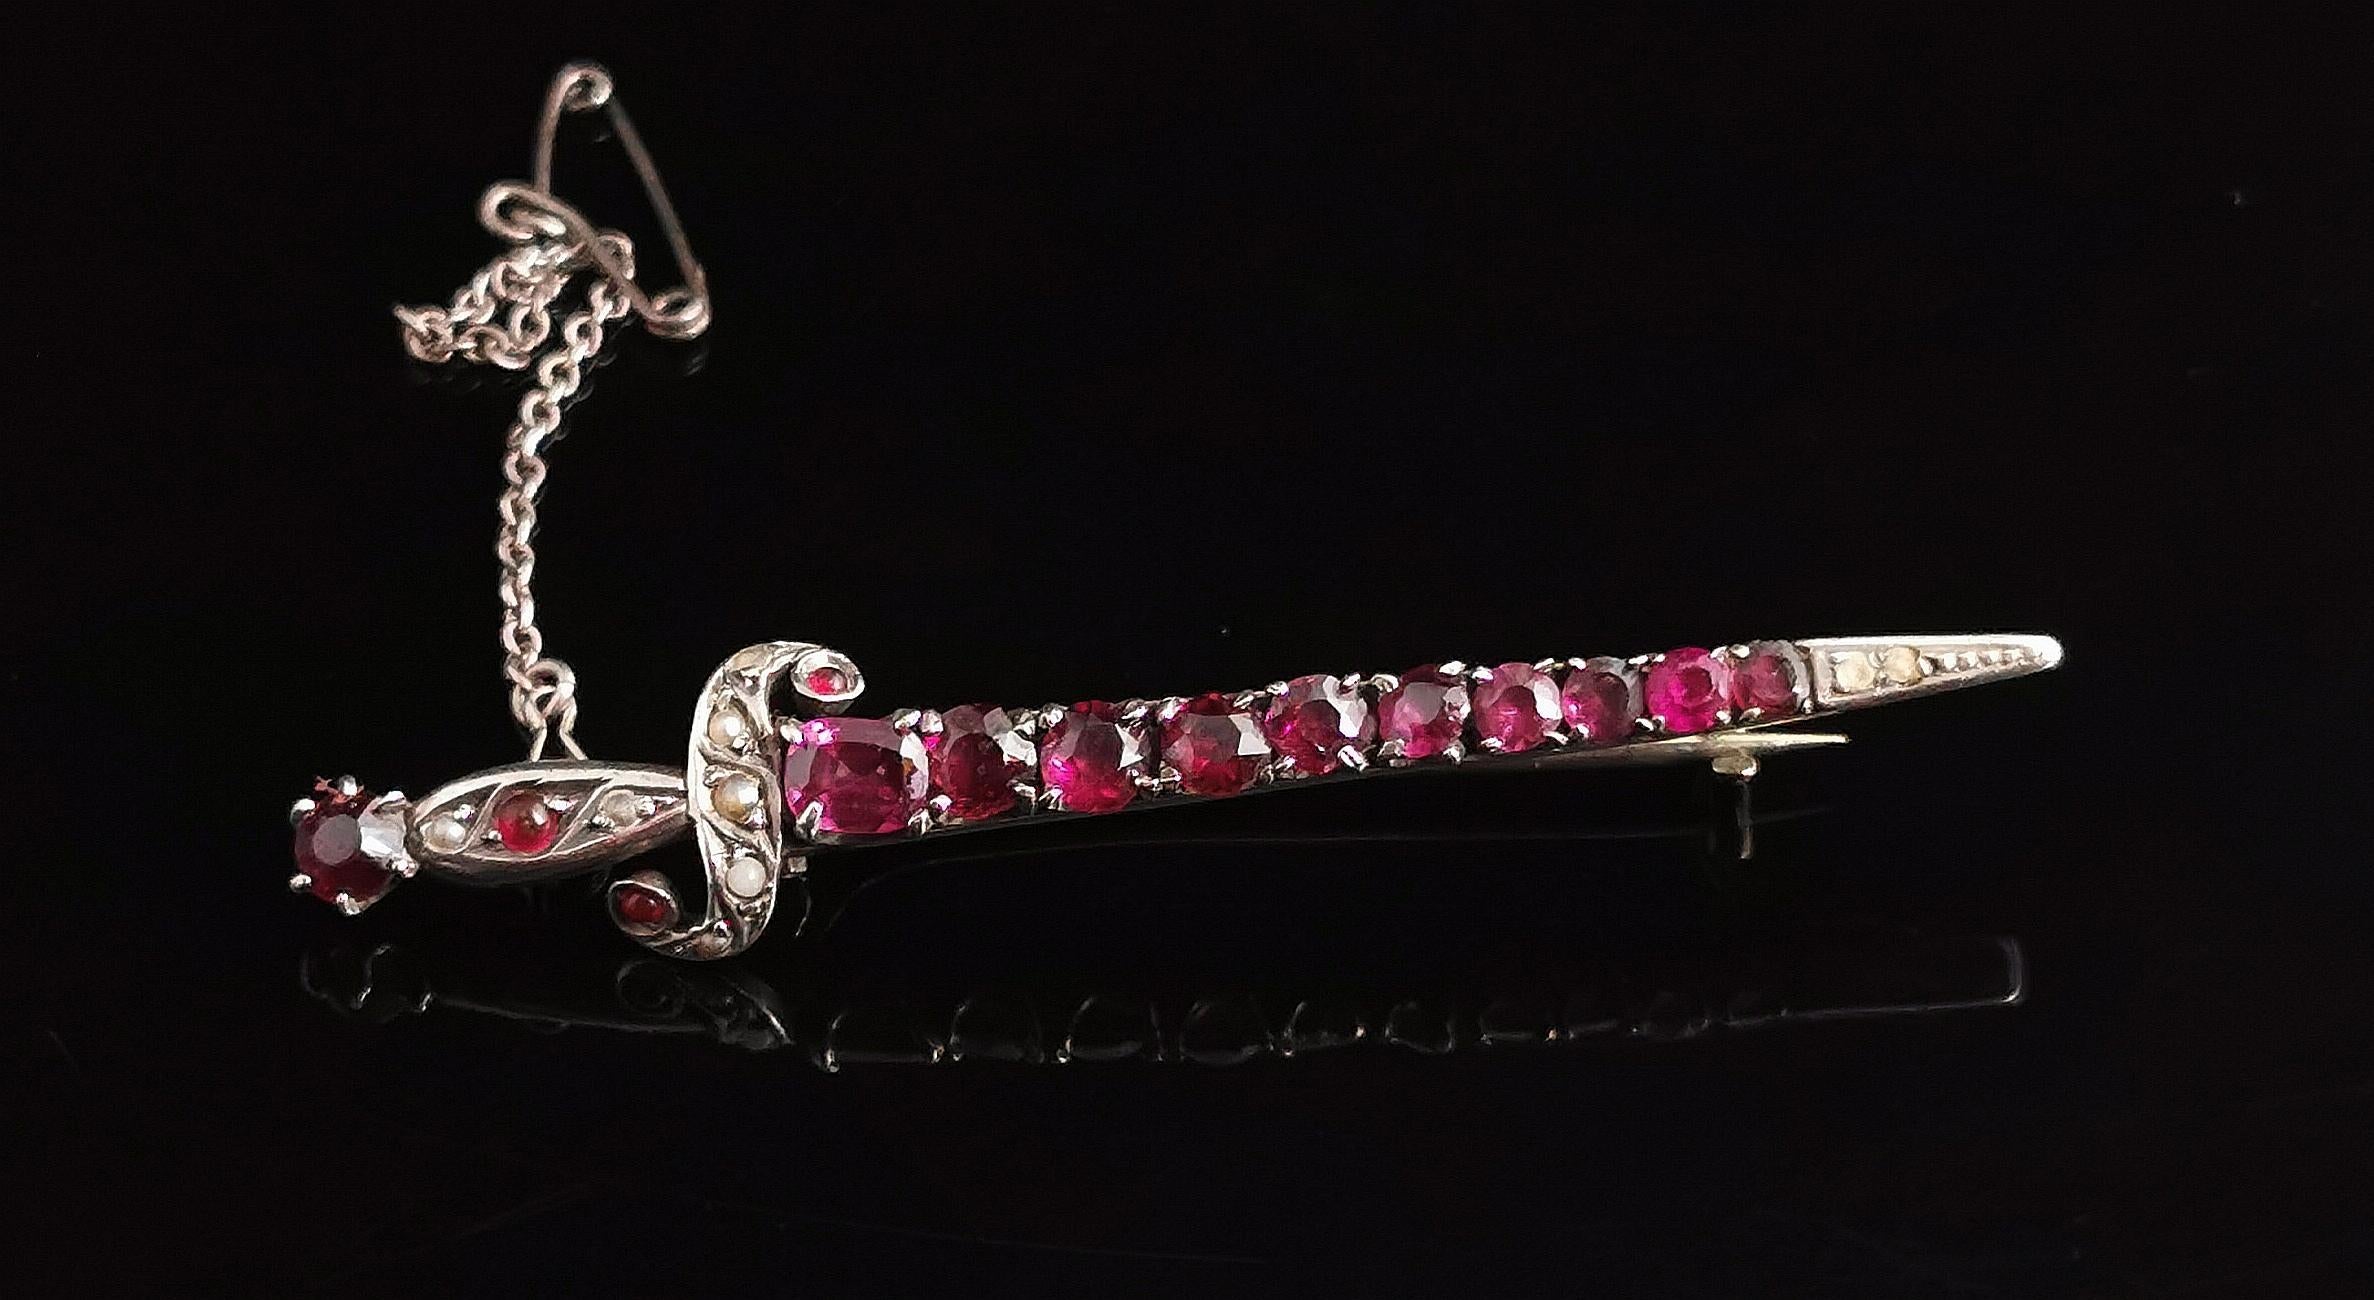 Antique French Sword Brooch, Rhodolite Garnet and Seed Pearl, Silver 1